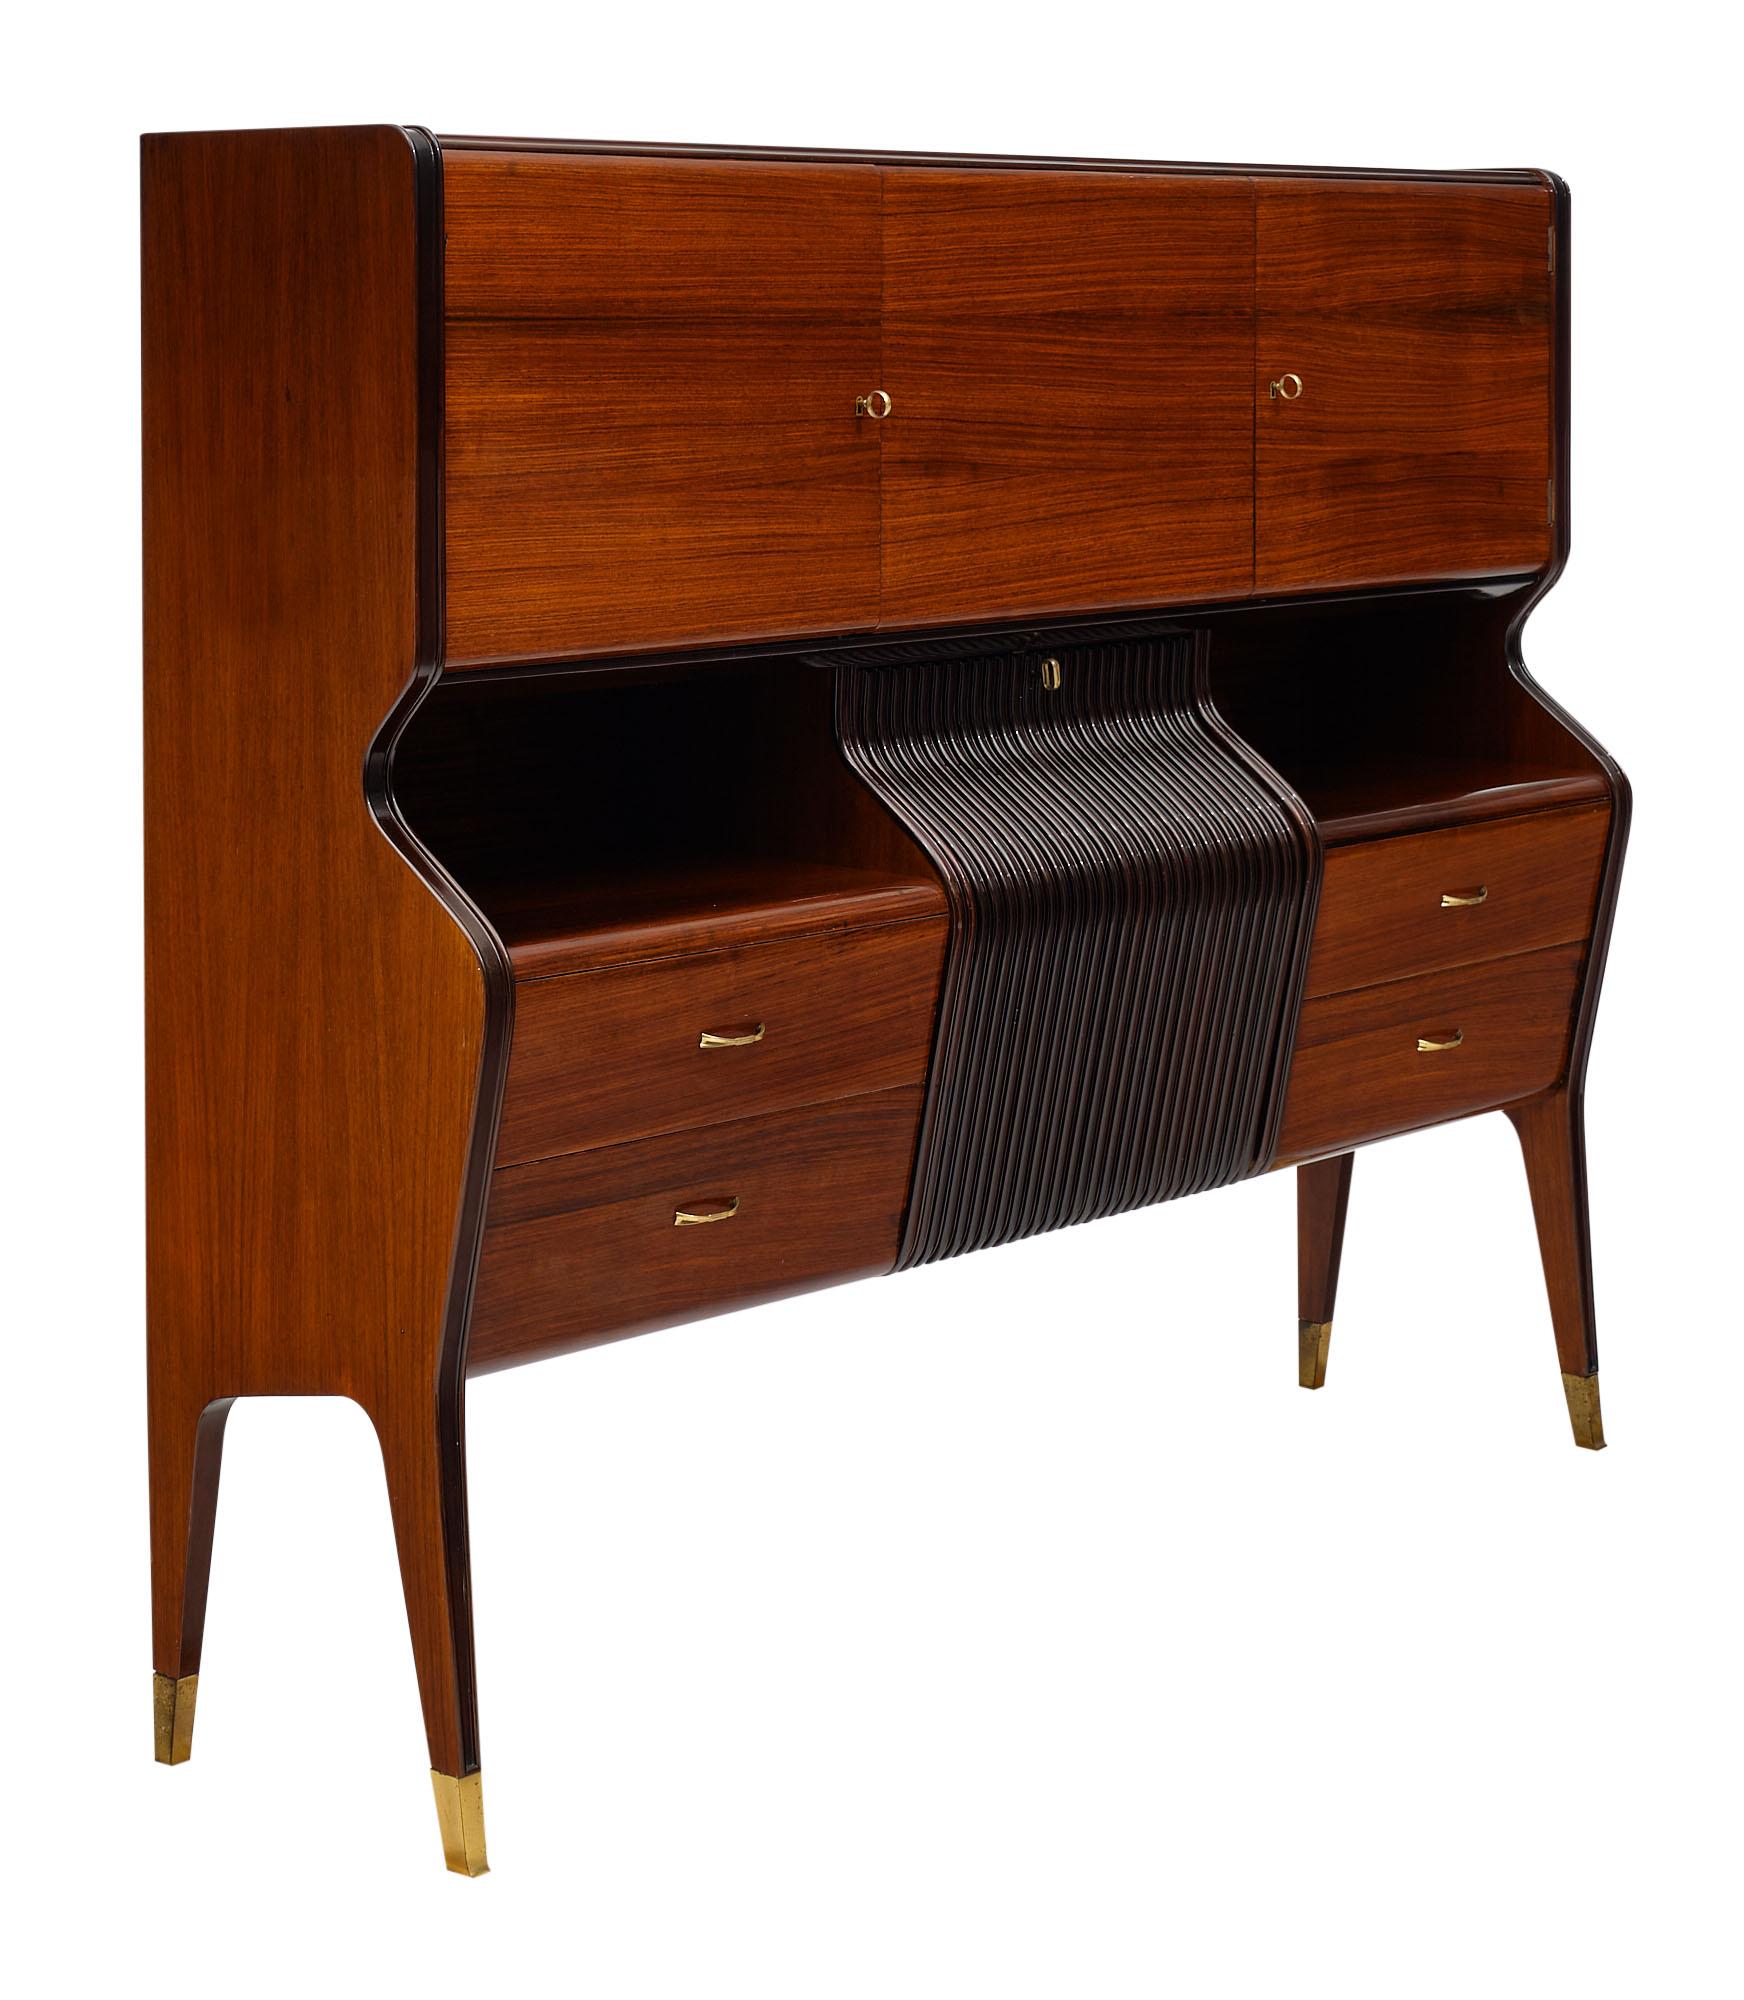 Italian rosewood buffet and bar by Italian designer Osvaldo Borsani. This fine cabinet features a mirrored and tinted glass upper compartment behind folding doors, on the bottom four dovetailed drawers separated by a ridged ebonized drop front. We